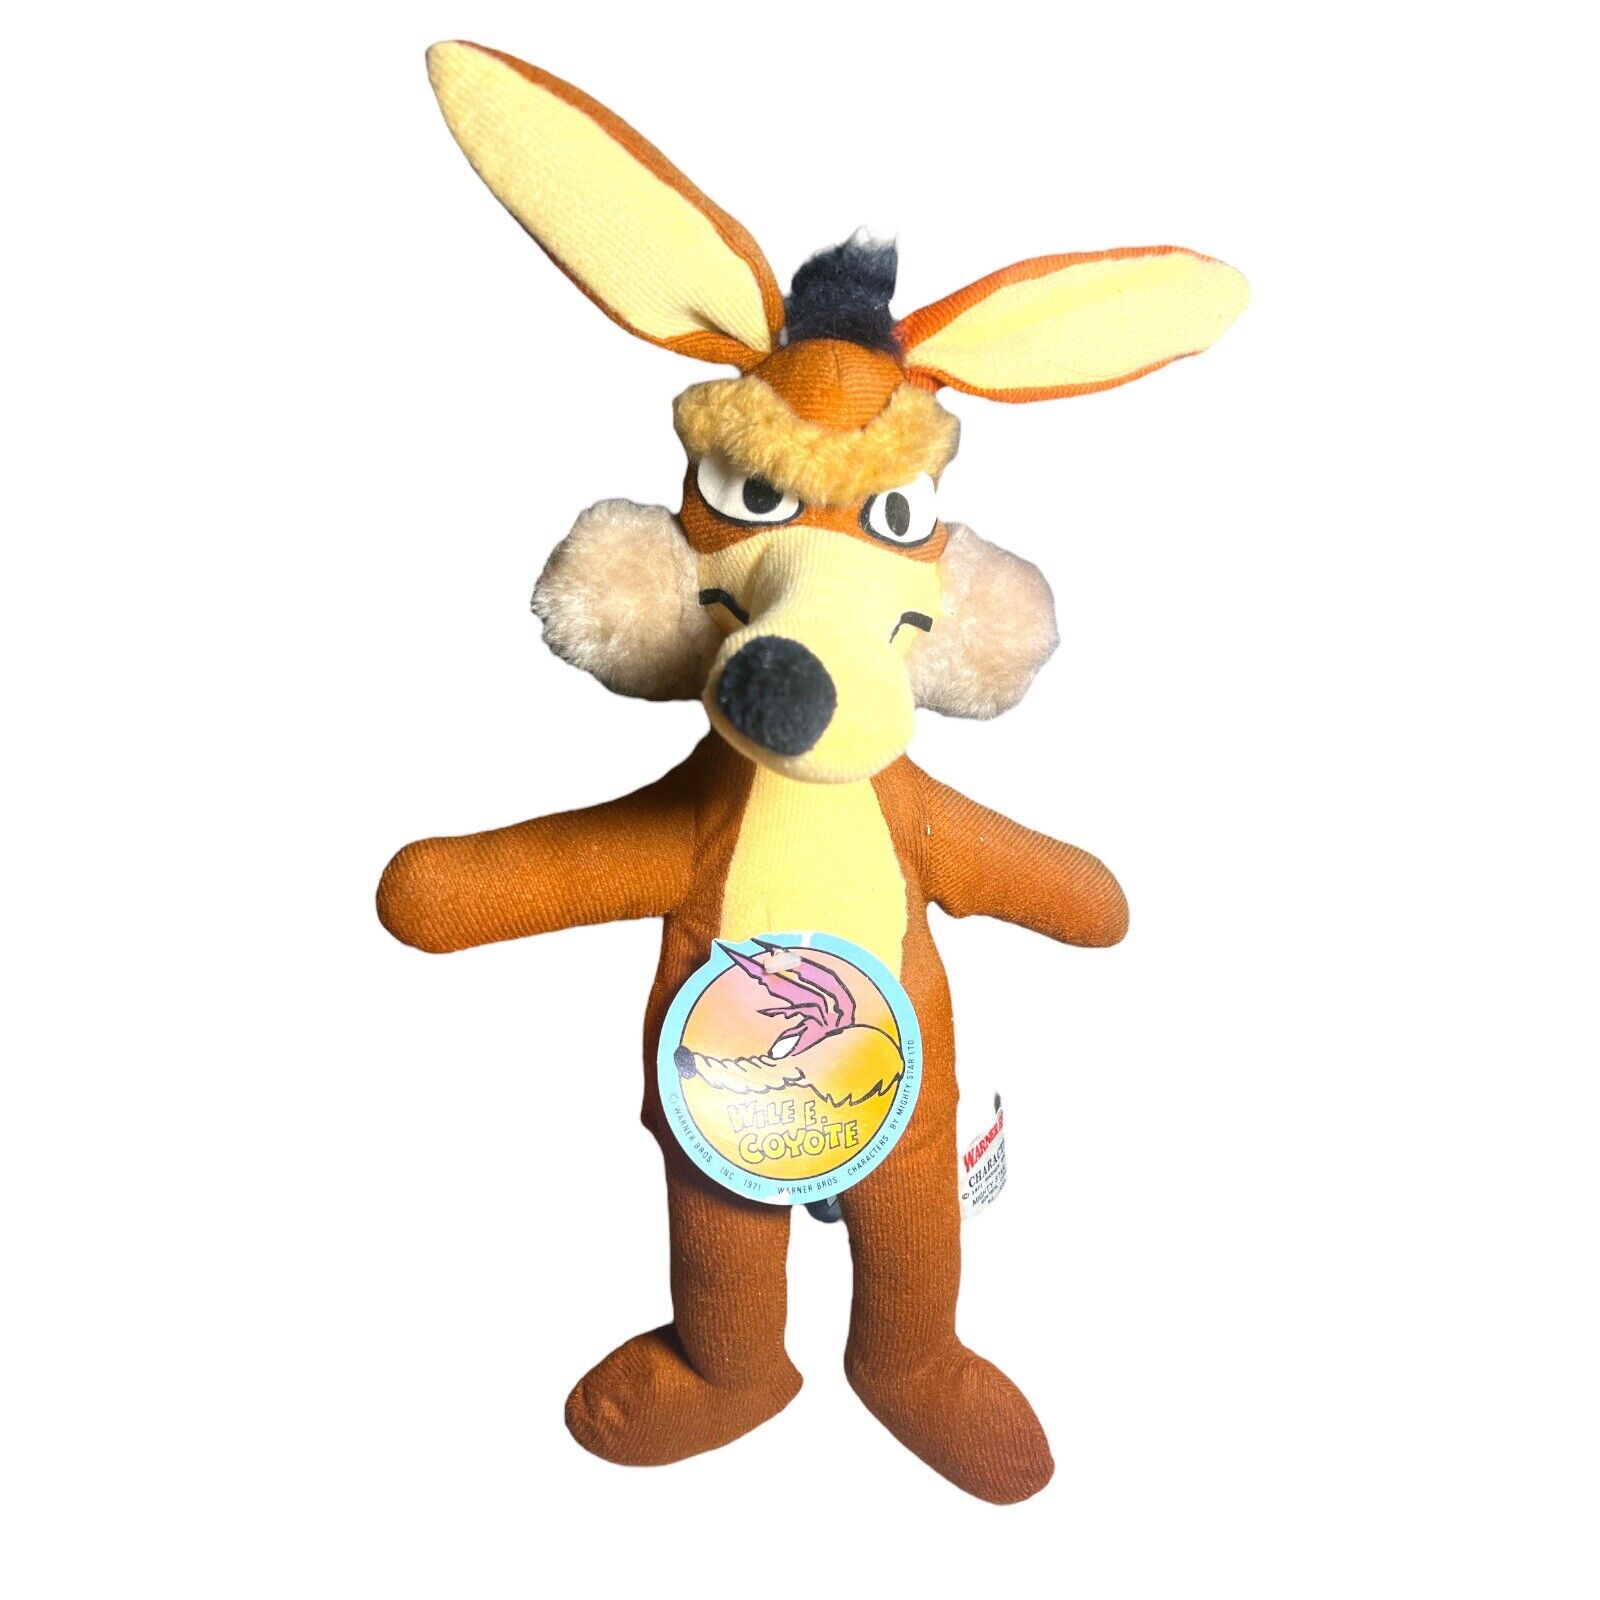 Wile E Coyote 1971 Warner Bros Mighty Star Stuffed Animal Plush With Tag 18 Inch